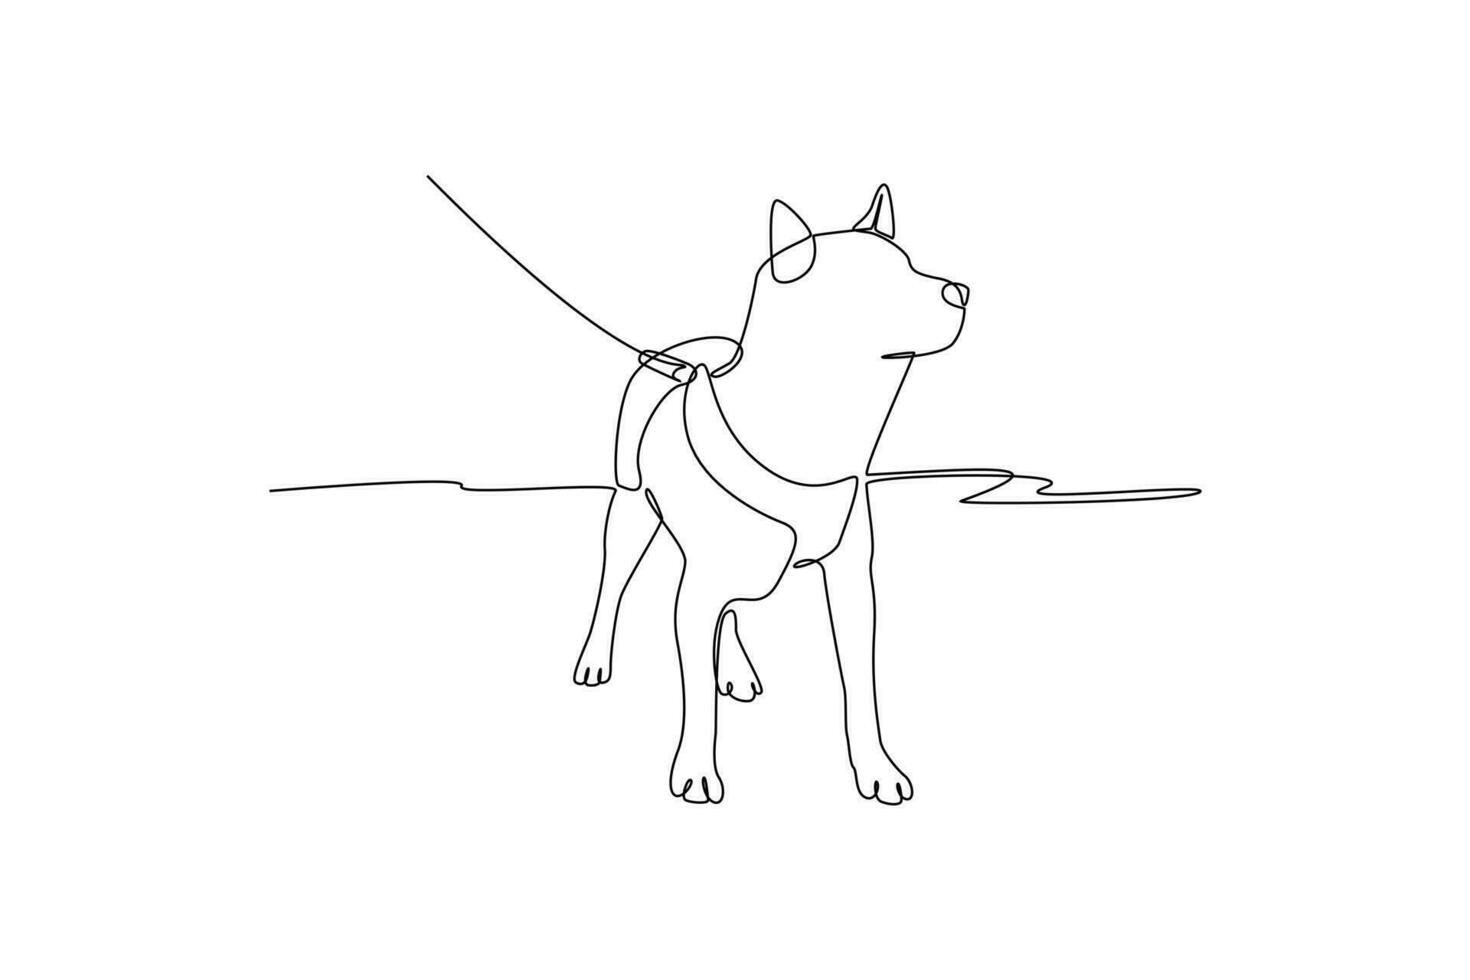 Single one-line drawing cute pet dog. Urban pet concept. Continuous line draw design graphic vector illustration.